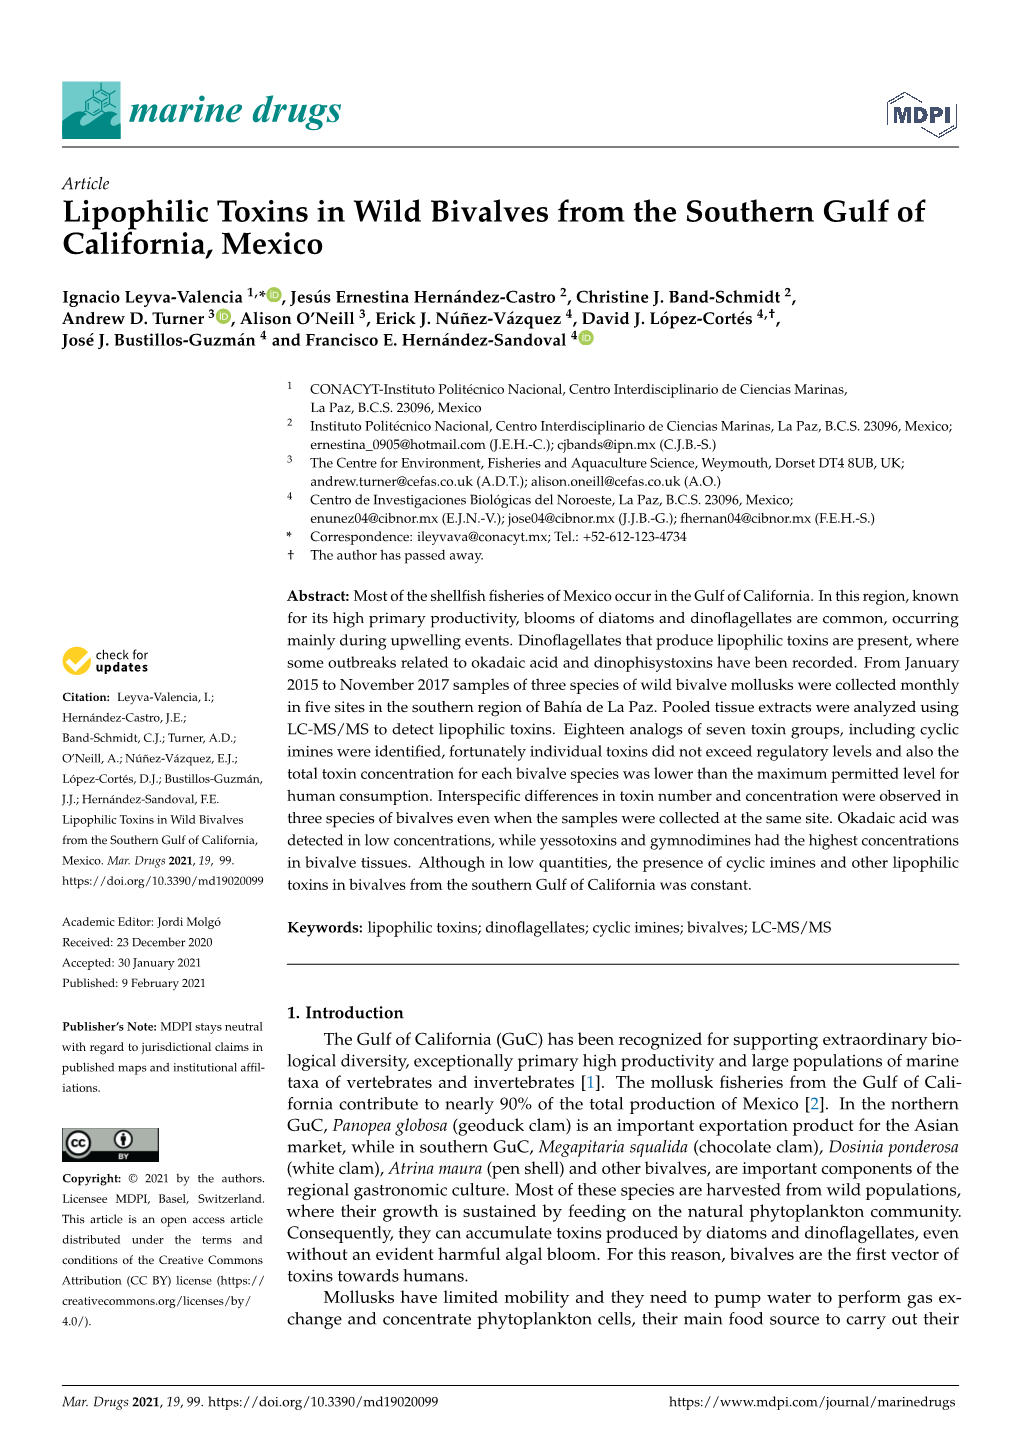 Lipophilic Toxins in Wild Bivalves from the Southern Gulf of California, Mexico